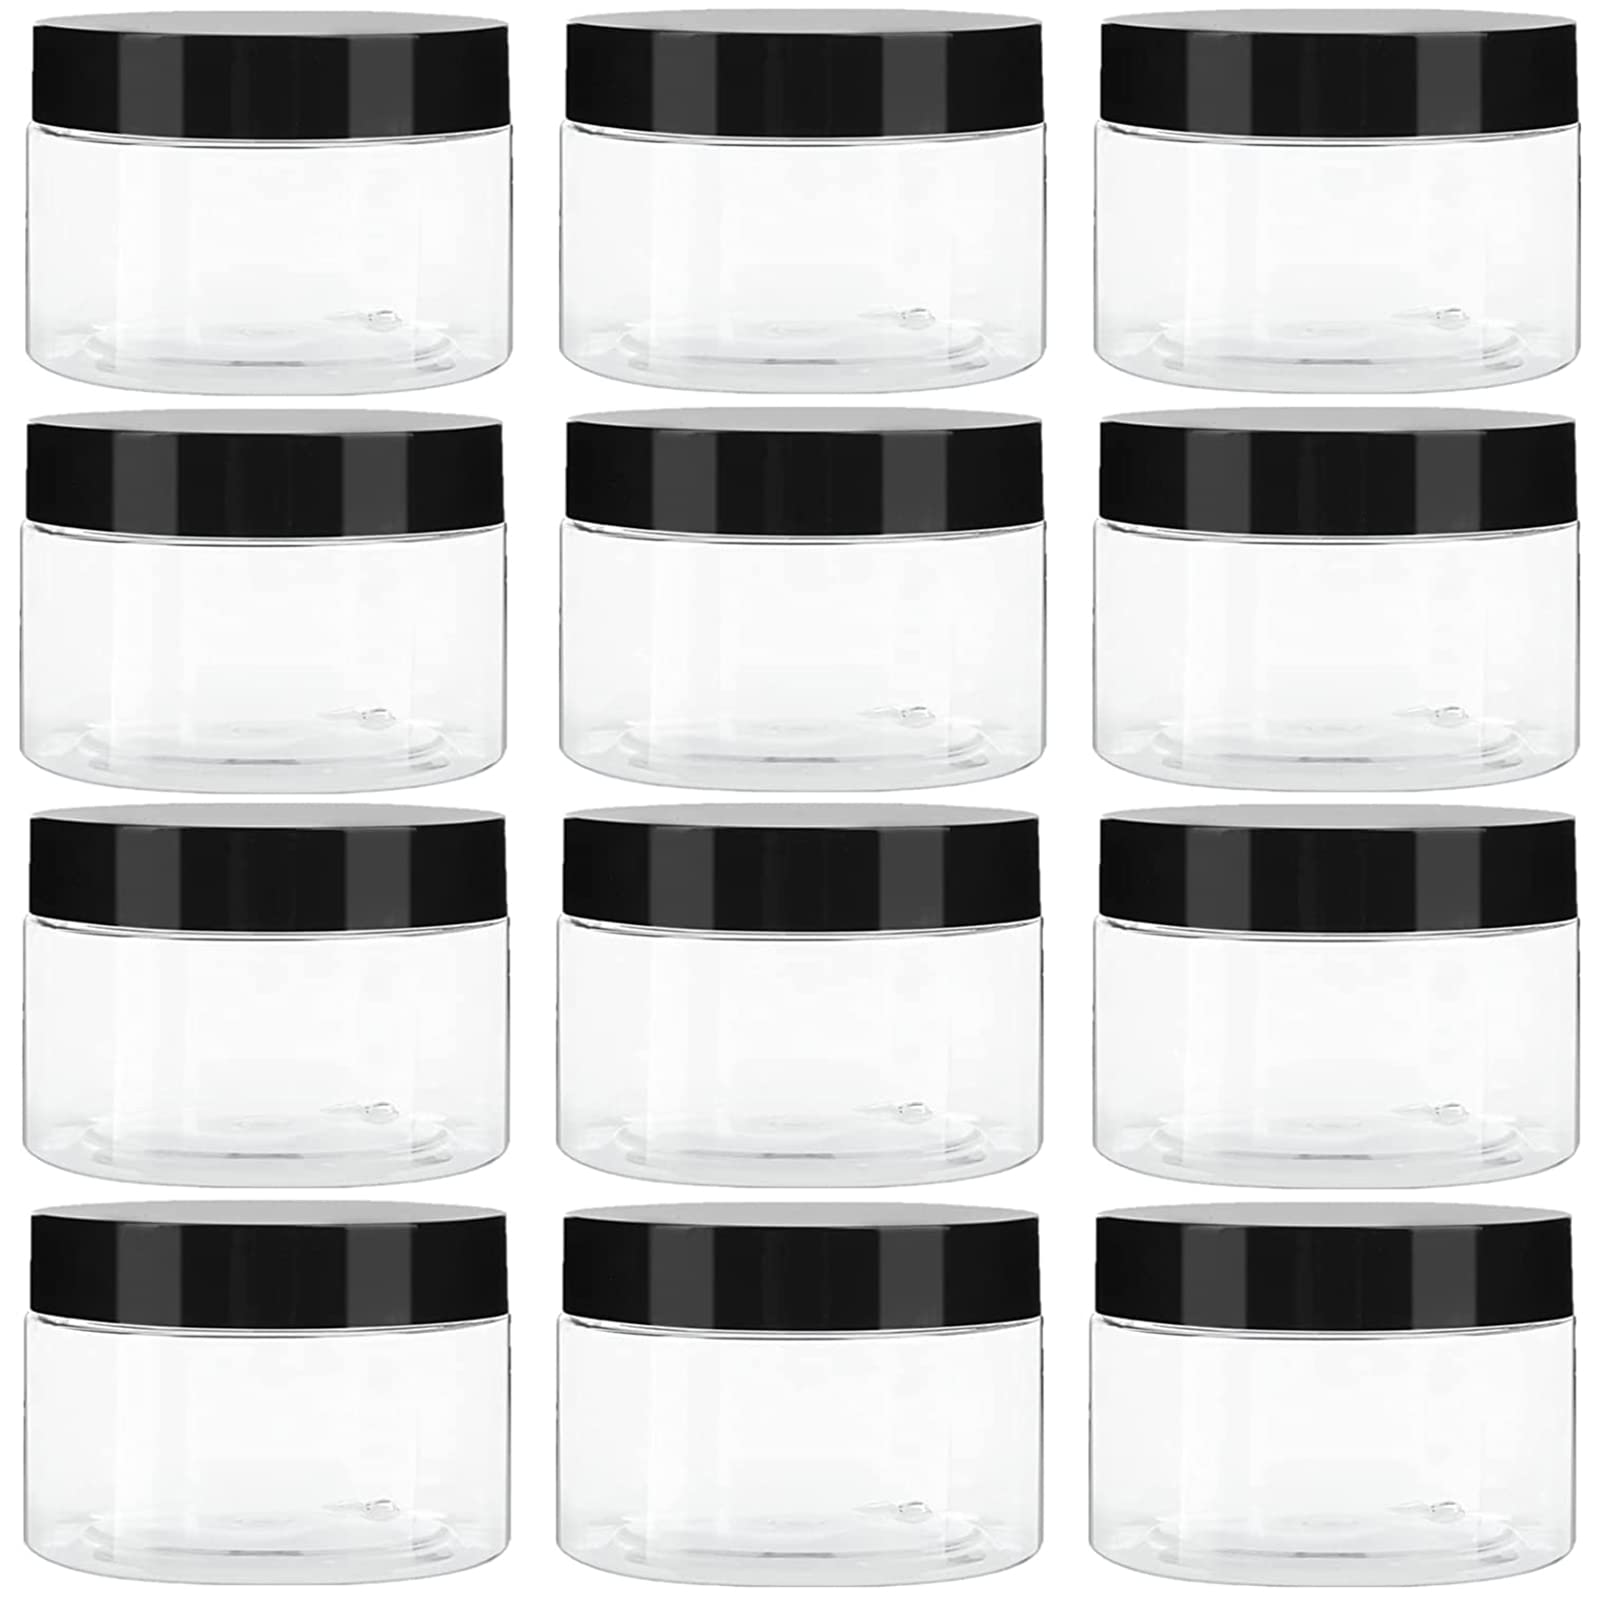 12 Pack Clear Plastic Jars Containers with Screw On Lids,Refillable  Wide-Mouth Plastic Slime Storage Containers for Beauty Products,Kitchen 